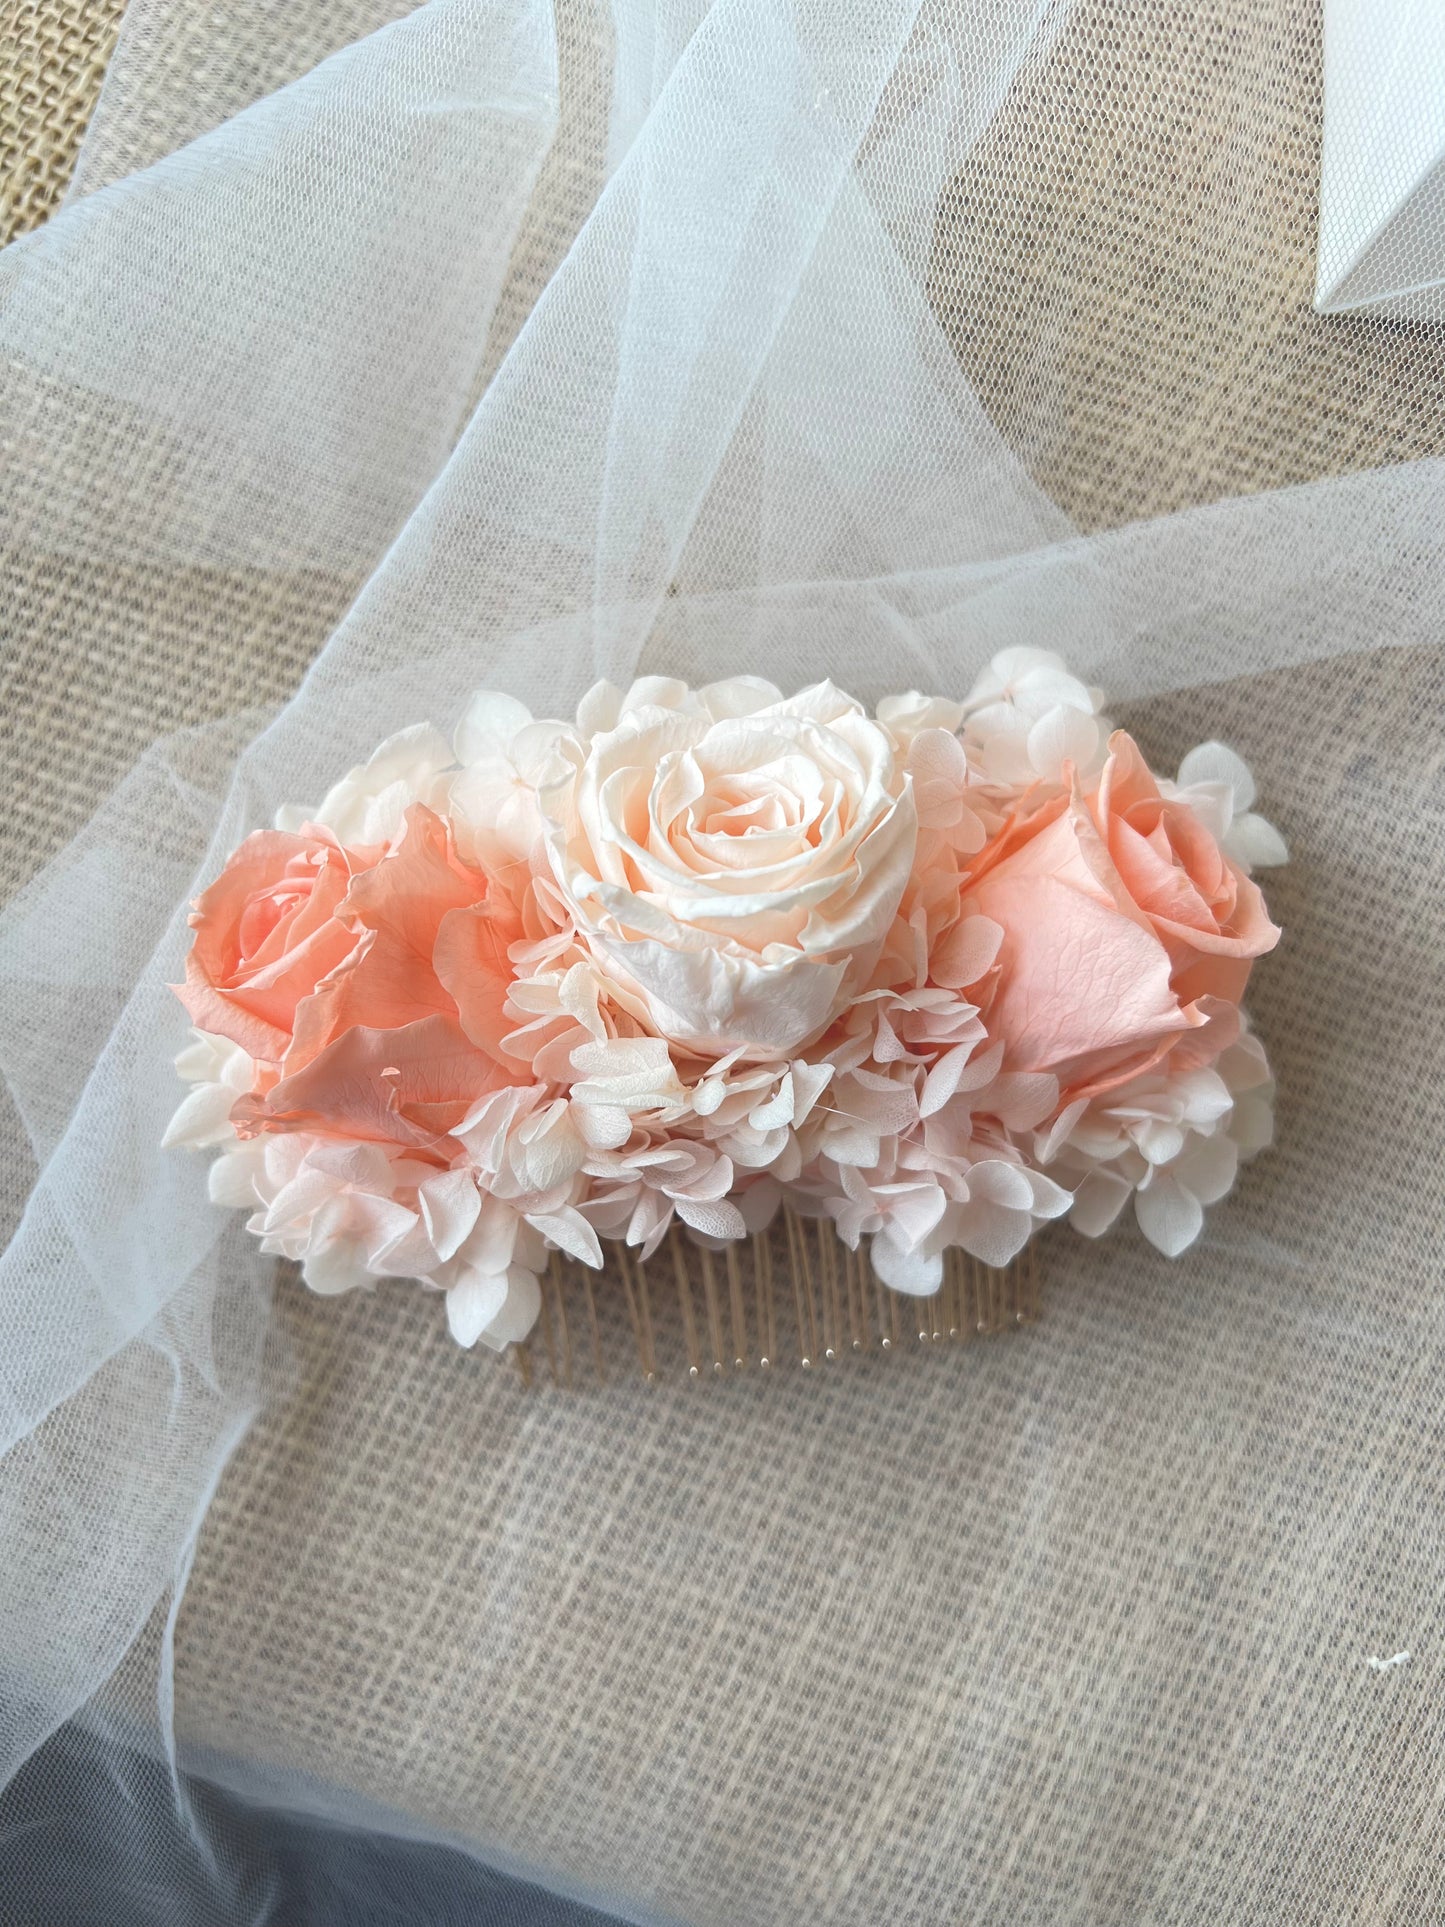 Bridal Rose Wedding Floral Hair Accessories Soft Pastel Peach, Dried Flower Hair Comb for Brides, Large Floral Hair Piece, Wedding Headpiece